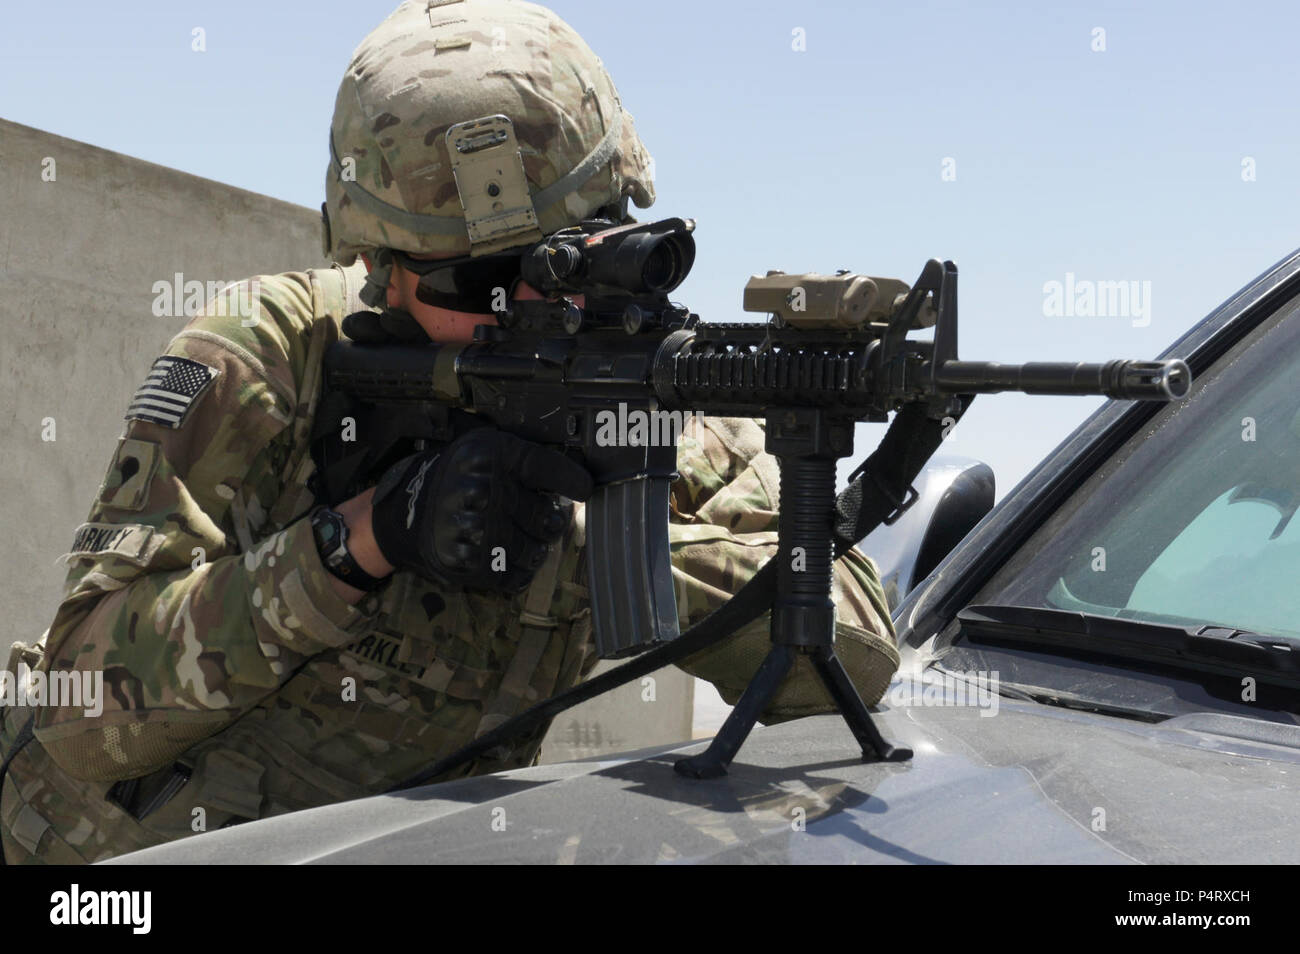 Spc. Leonard Markley scans the horizon for threats serving in a security detail during a press visit at Kabul Military Training Compound in Kabul. Stock Photo